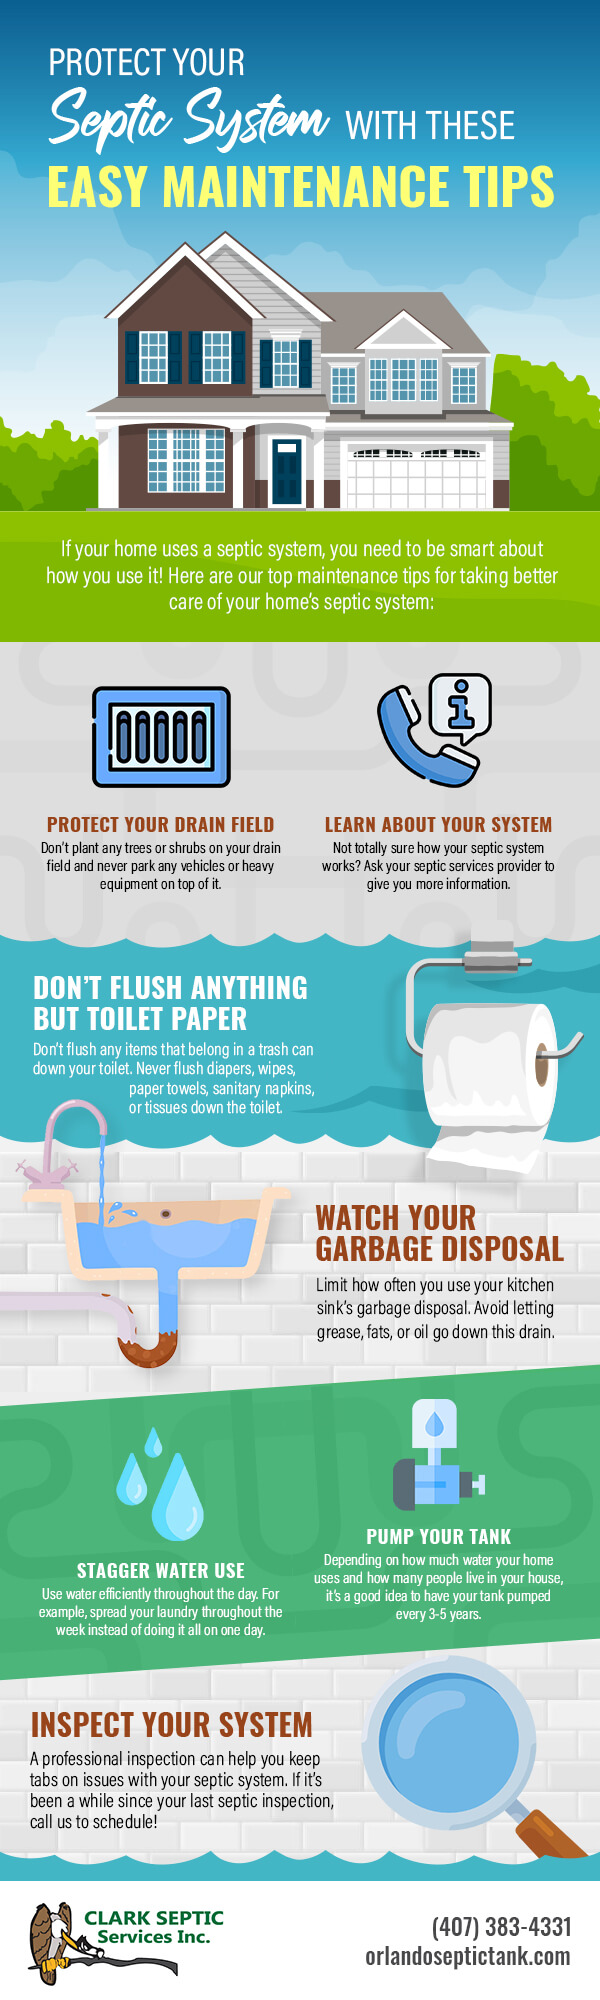 Protect Your Septic System with These Easy Maintenance Tips [infographic]